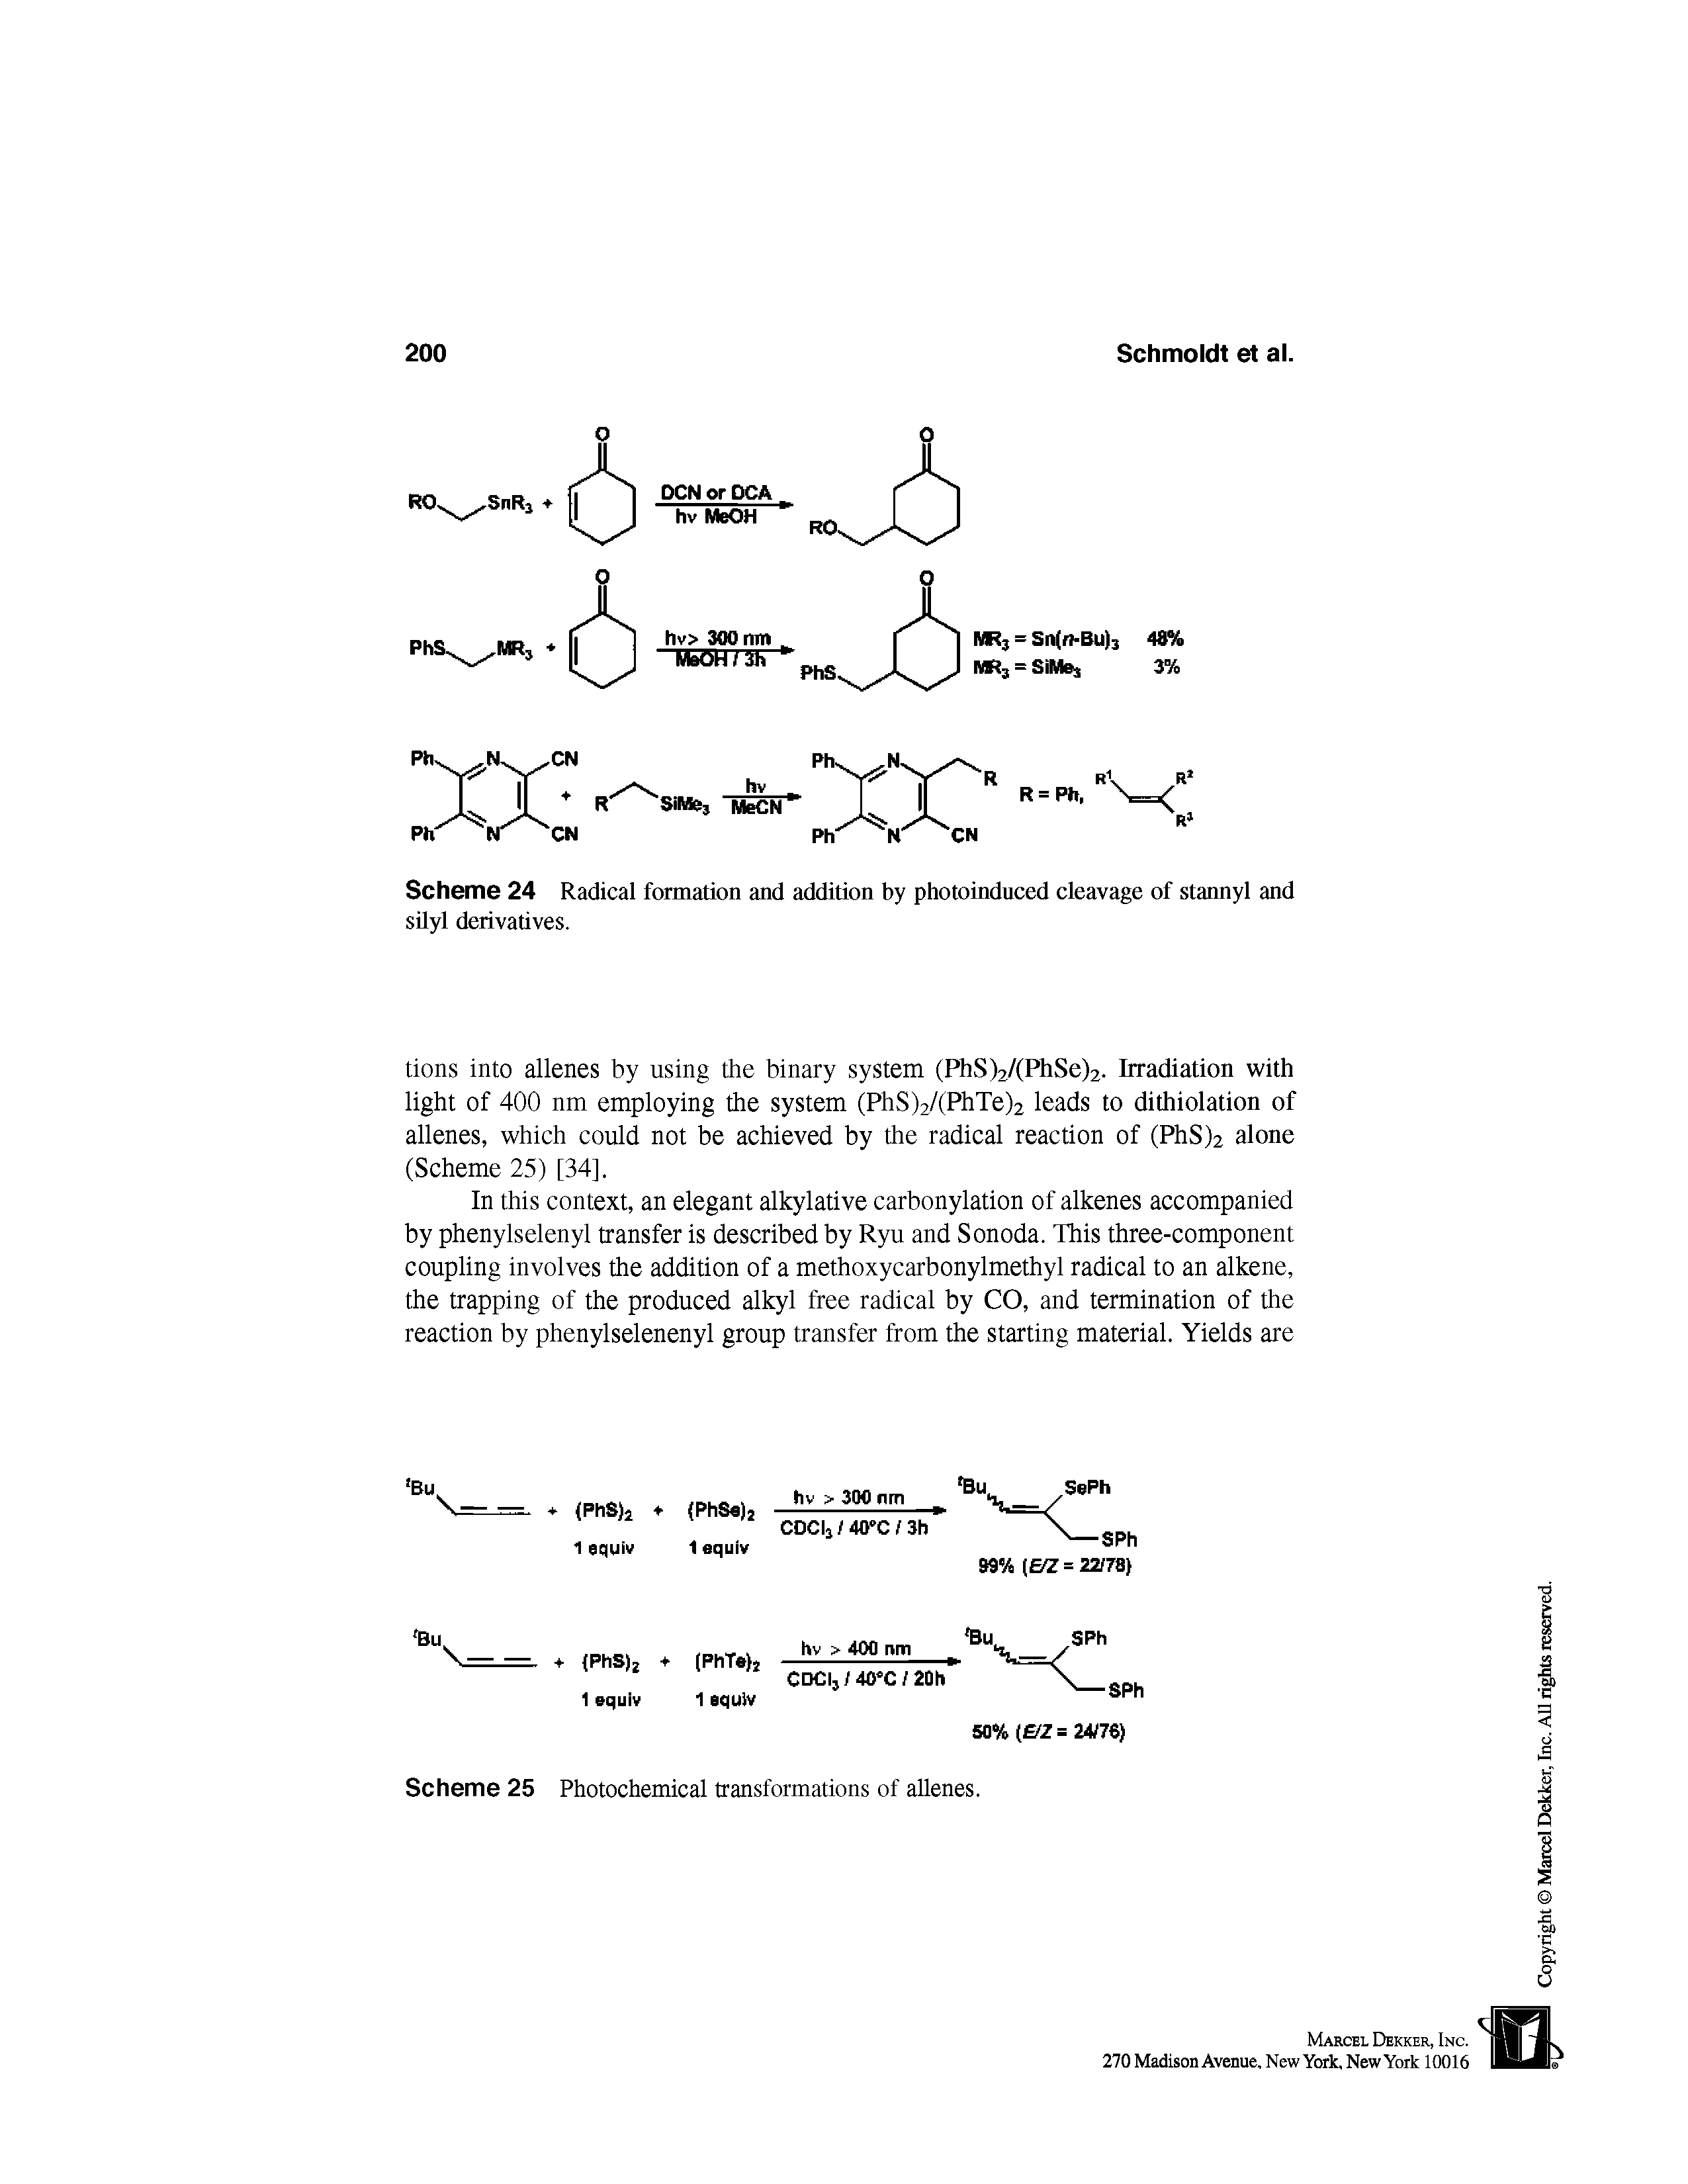 Scheme 24 Radical formation and addition by photoinduced cleavage of stannyl and silyl derivatives.